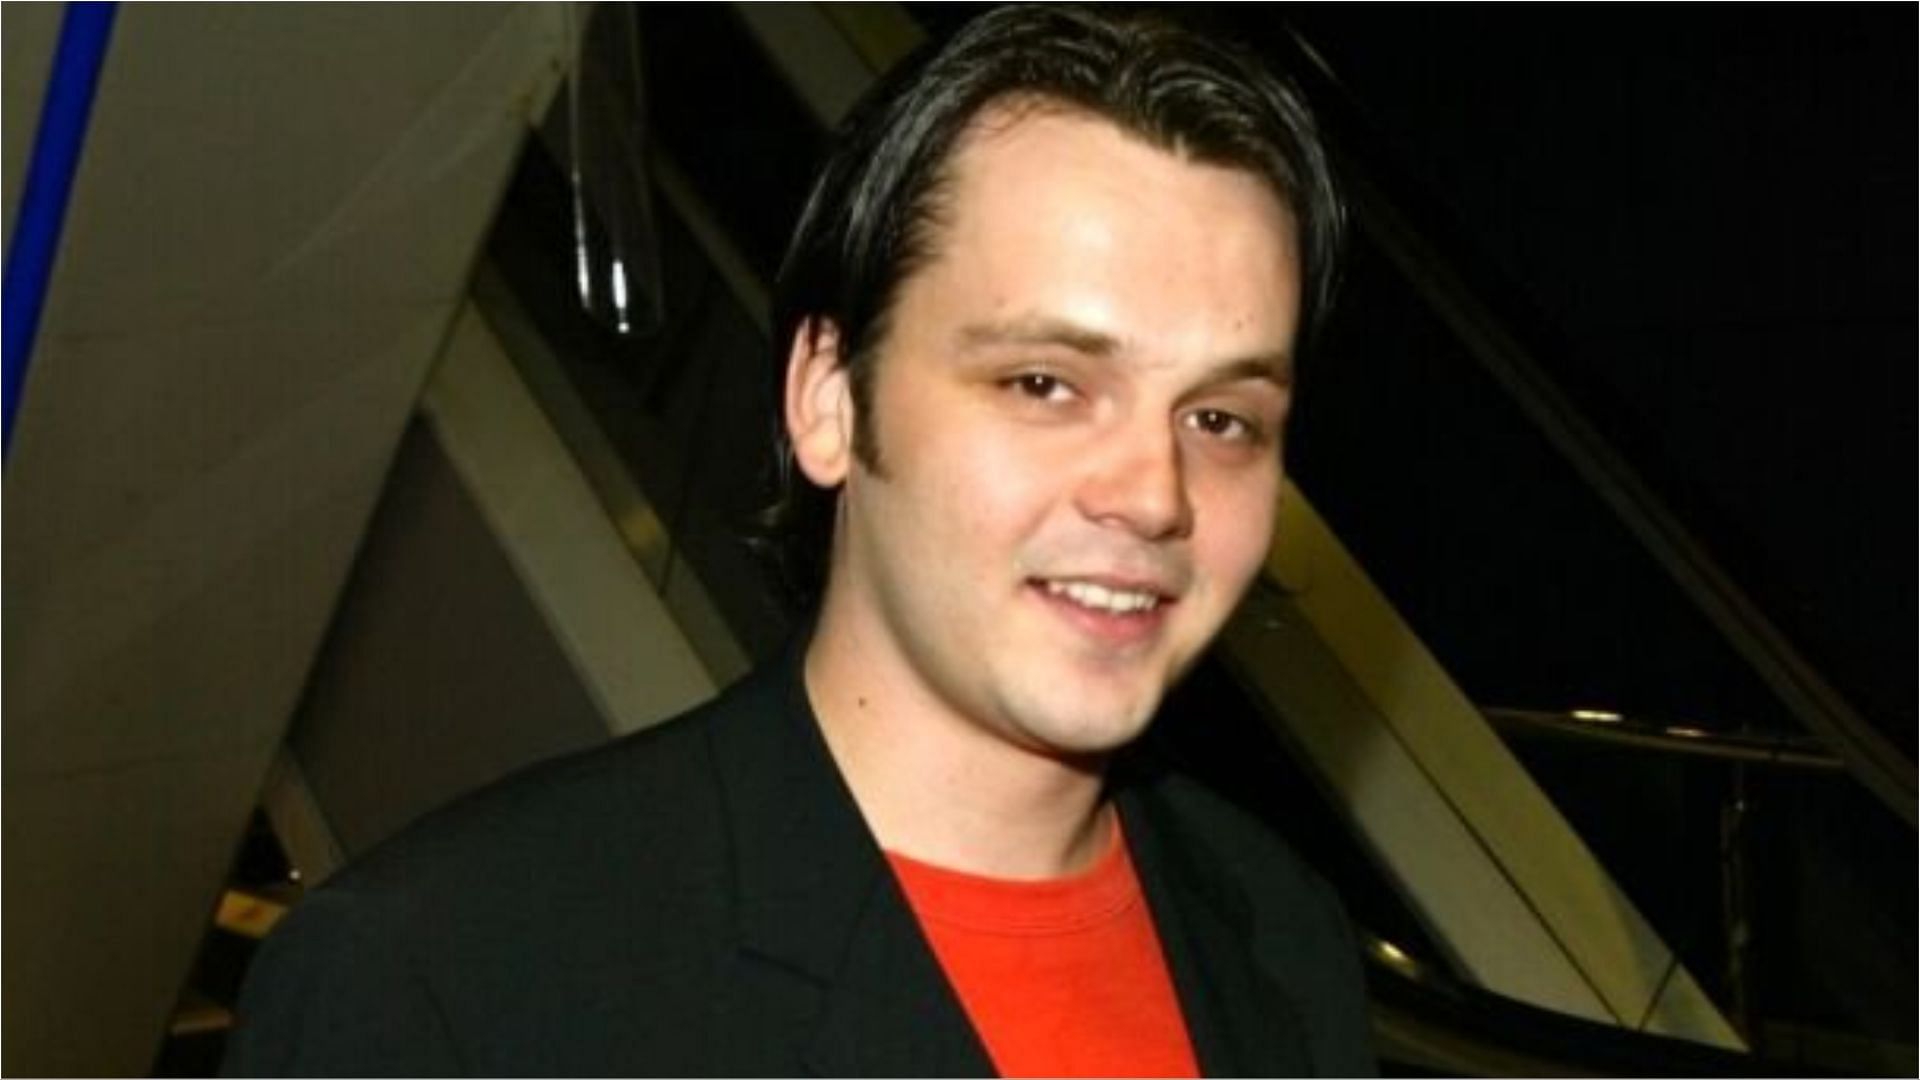 Paul Cattermole formed another band named Skua after his exit from S Club 7 (Image via Dave Hogan/Getty Images)